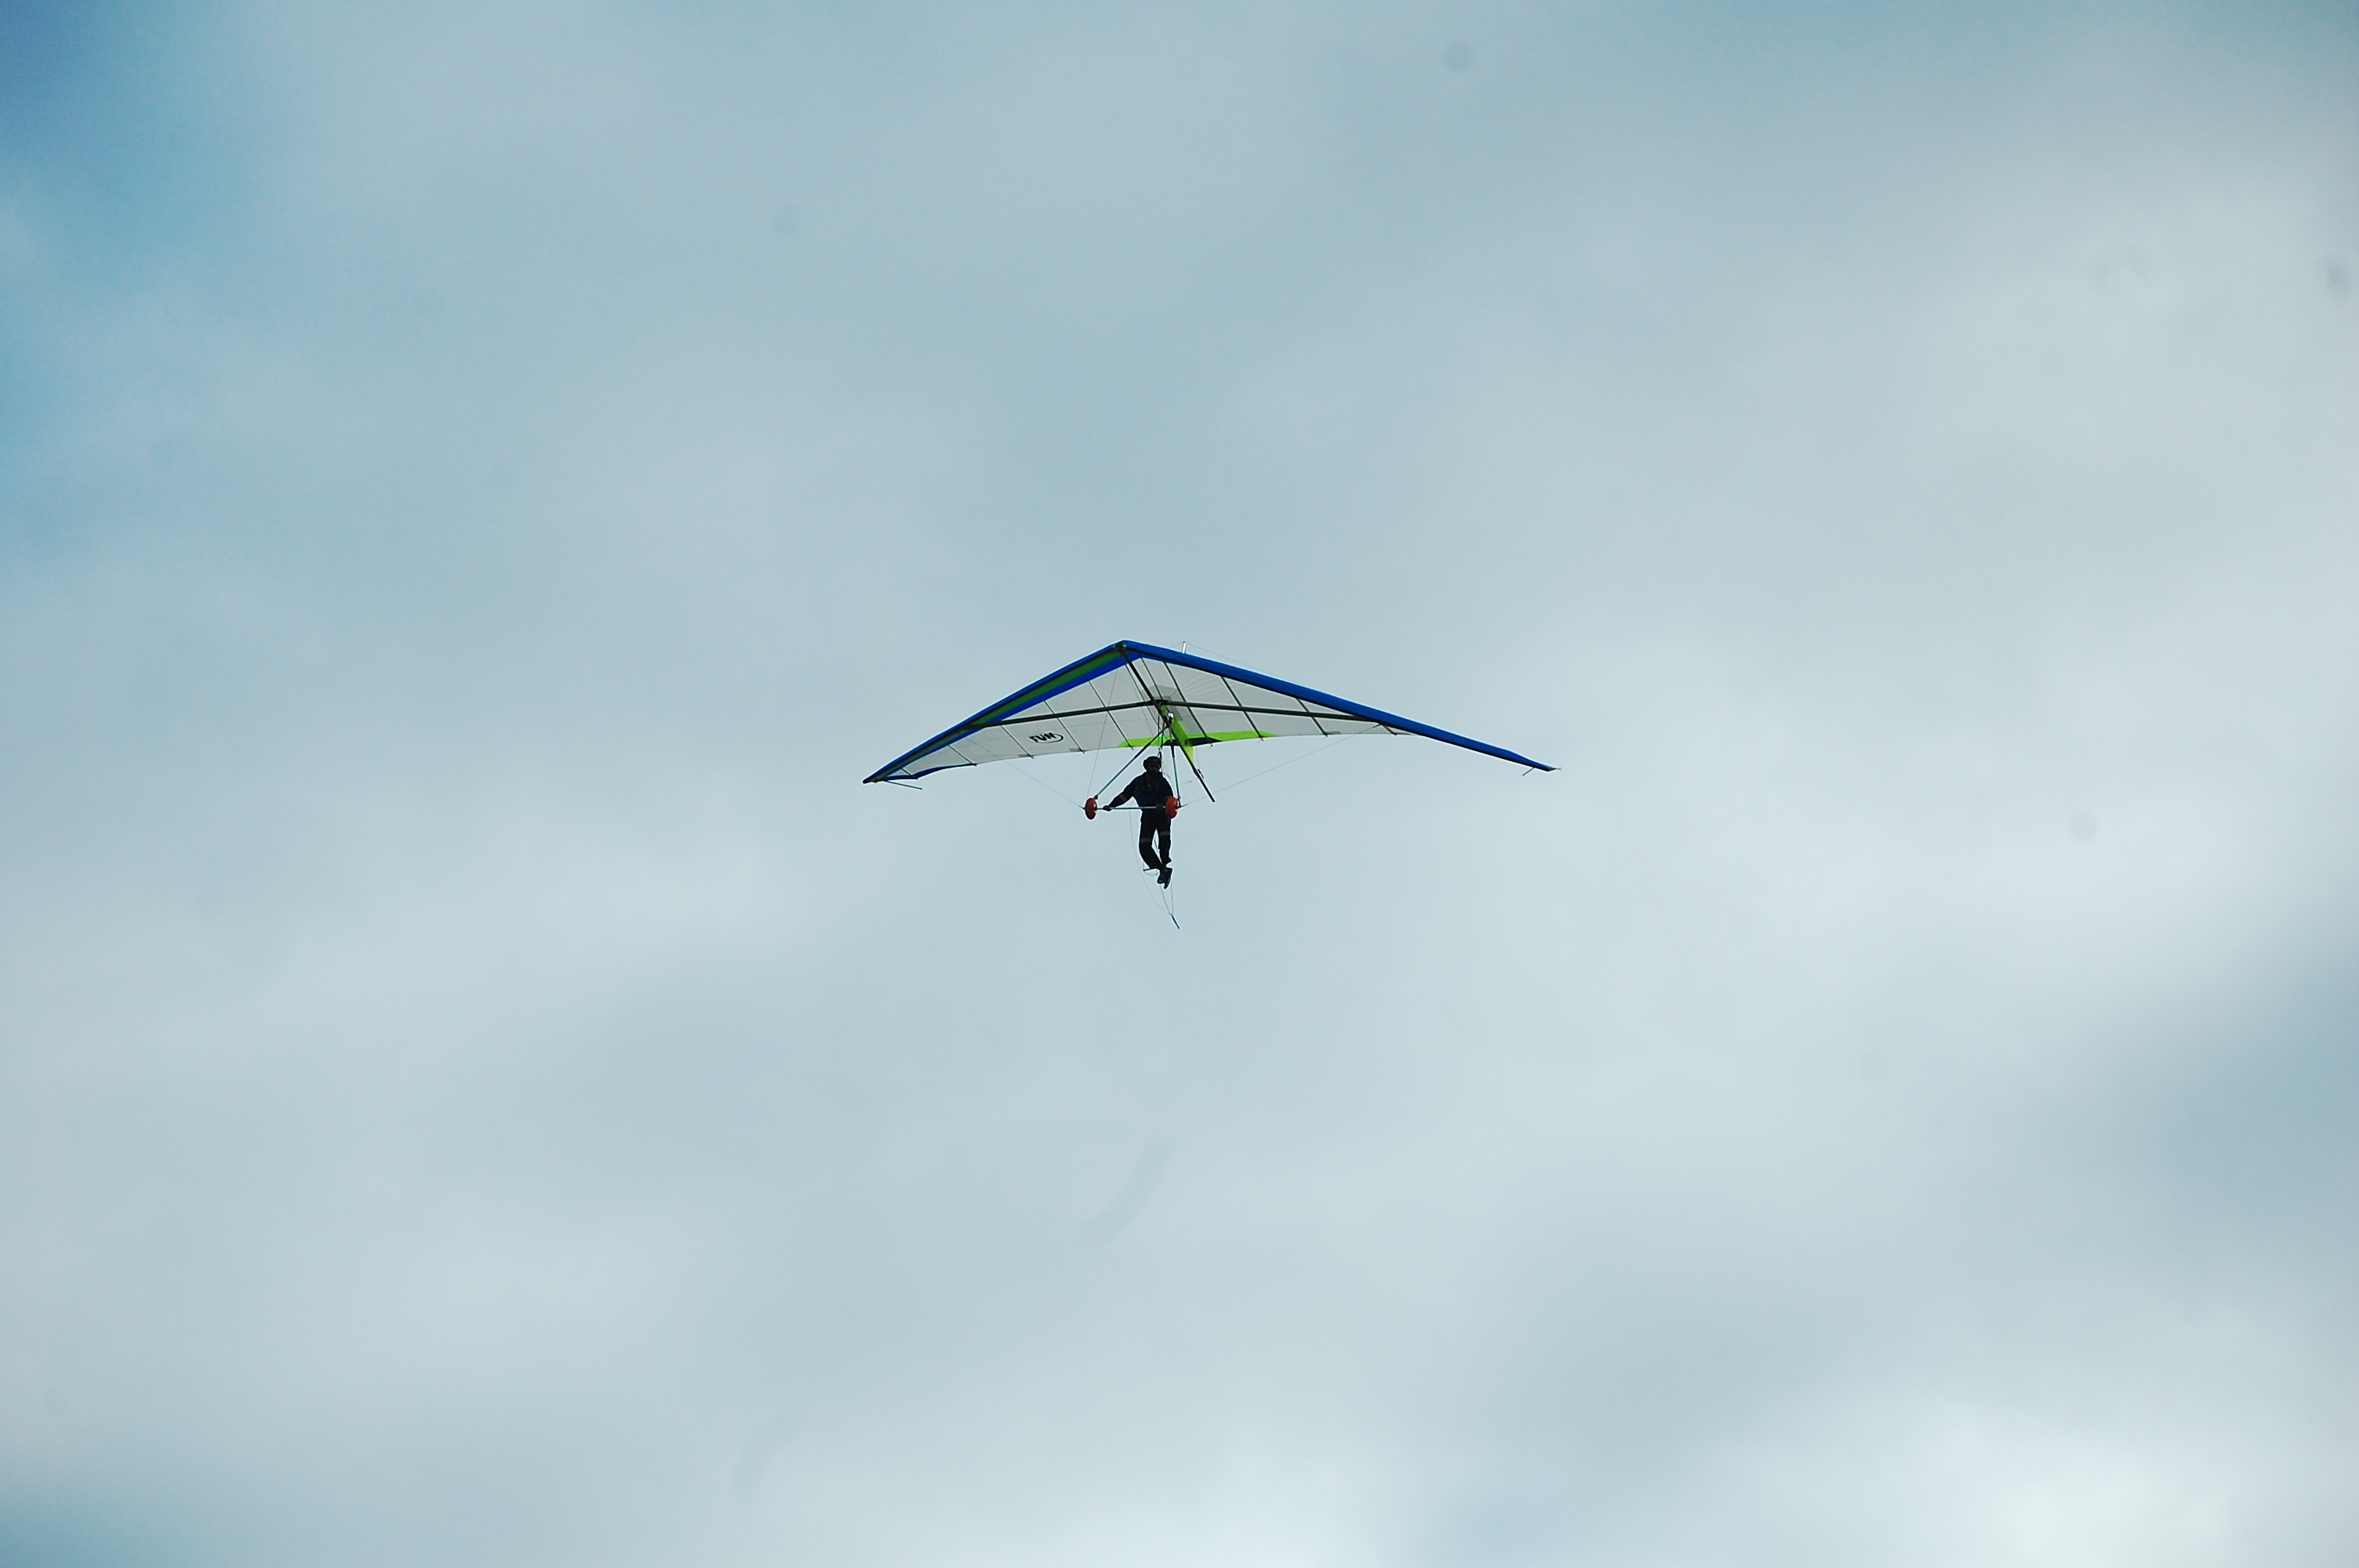 Buying a Used Hang Glider